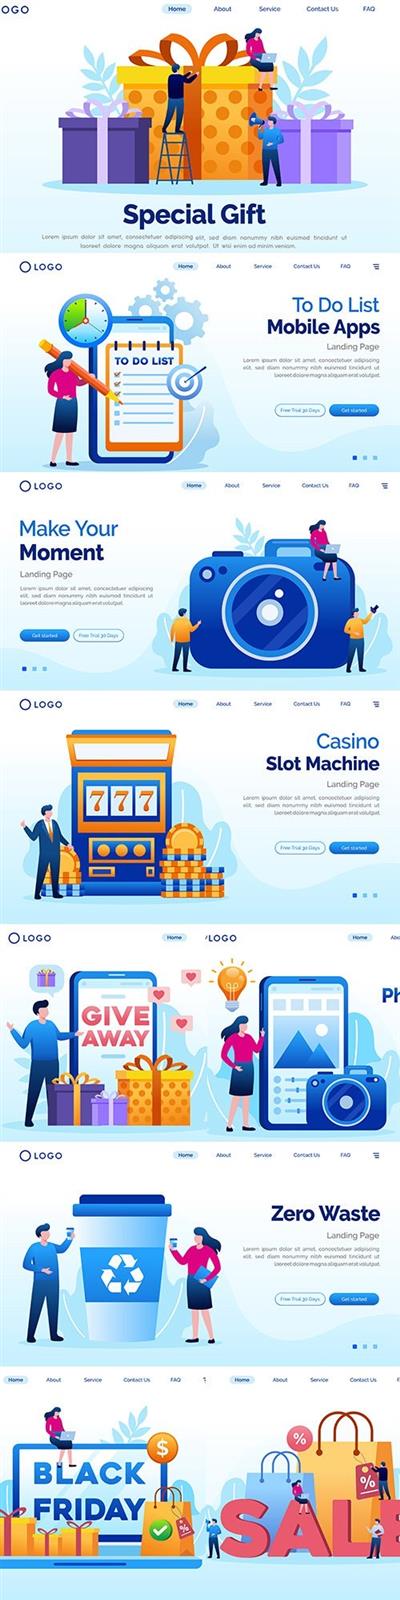 Flat design landing page website and applications